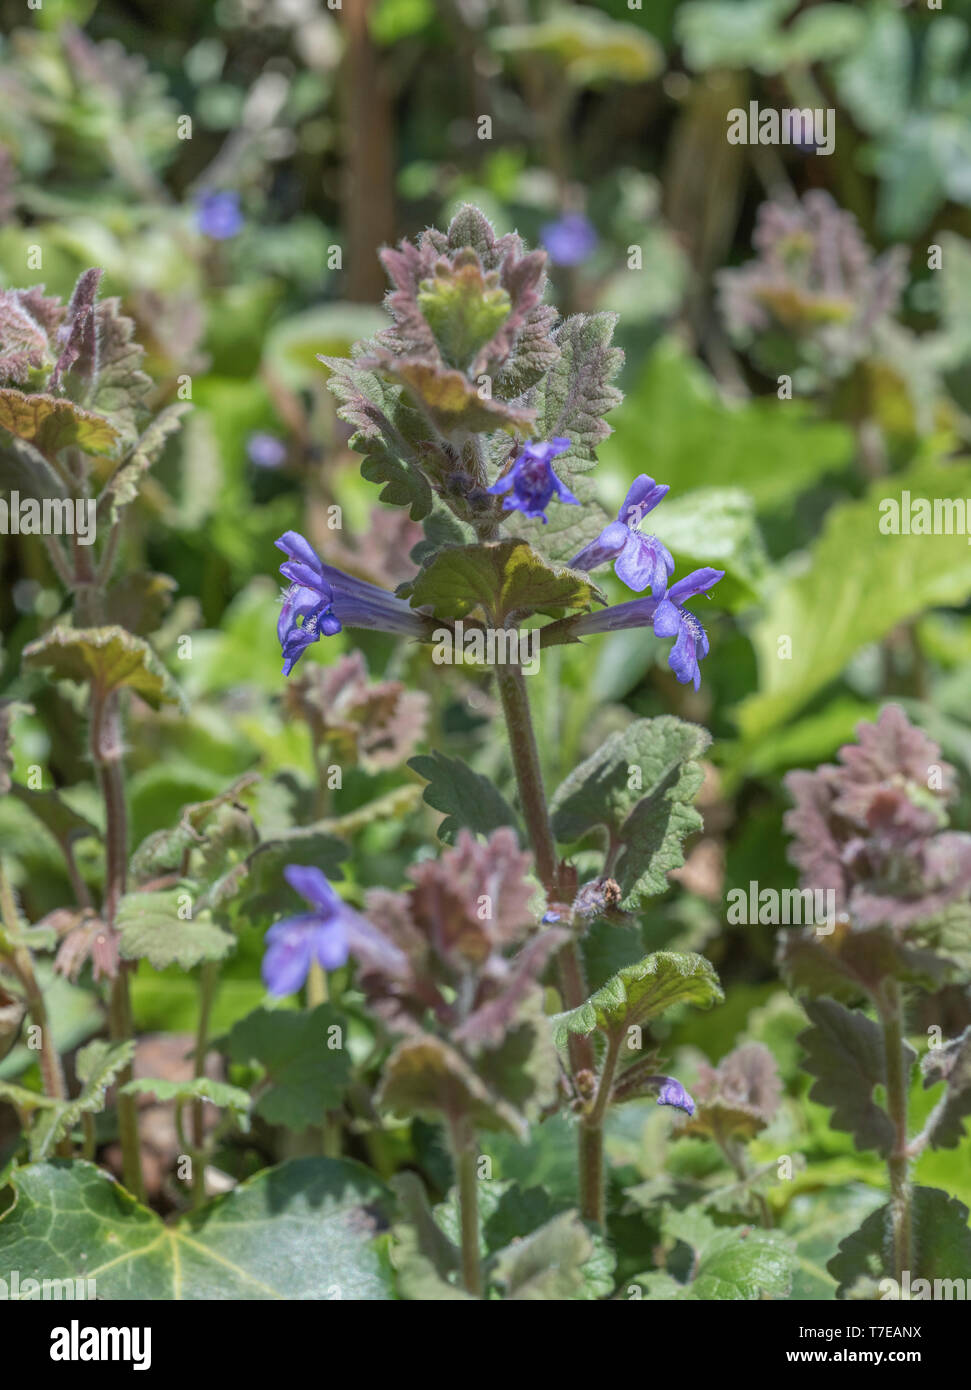 Foliage and flowers of Ground Ivy / Glechoma hederacea. Leaves have a minty flavour and were used as a tea substitute, and in herbal remedies. Stock Photo